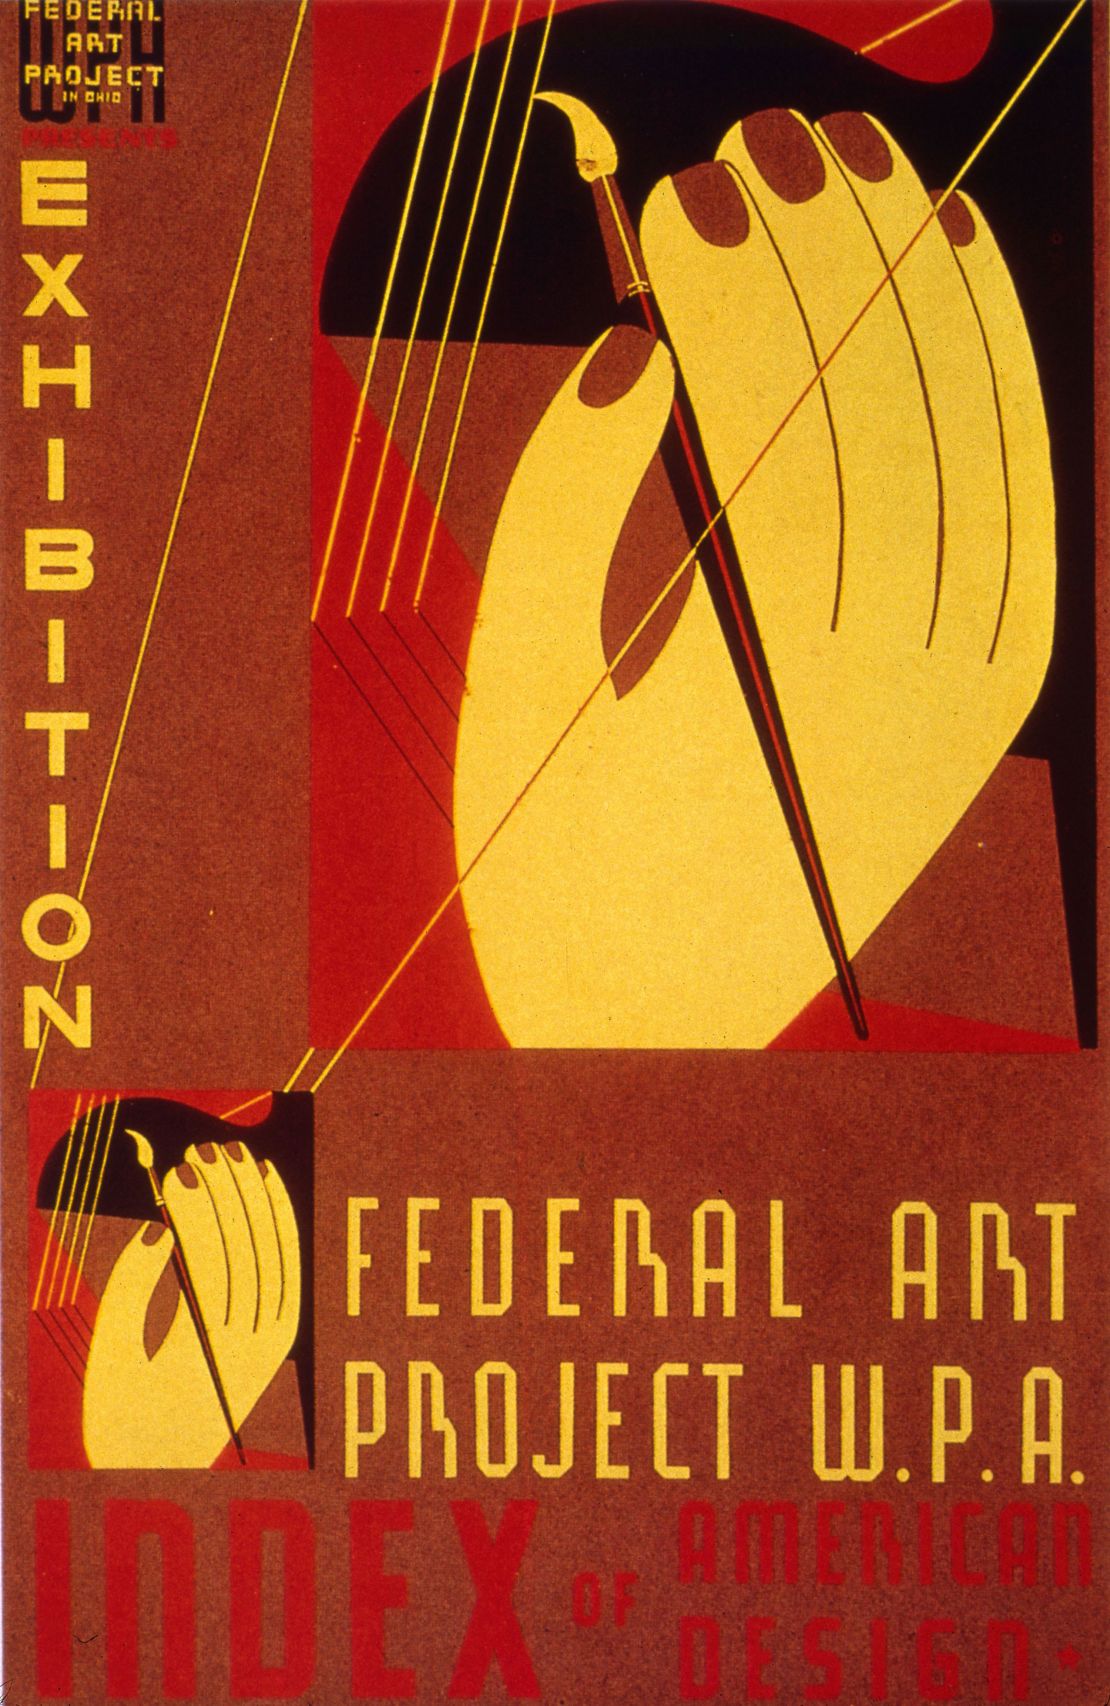 Federal Art Project WPA (Works Progress Administration) poster advertising an exhibition.